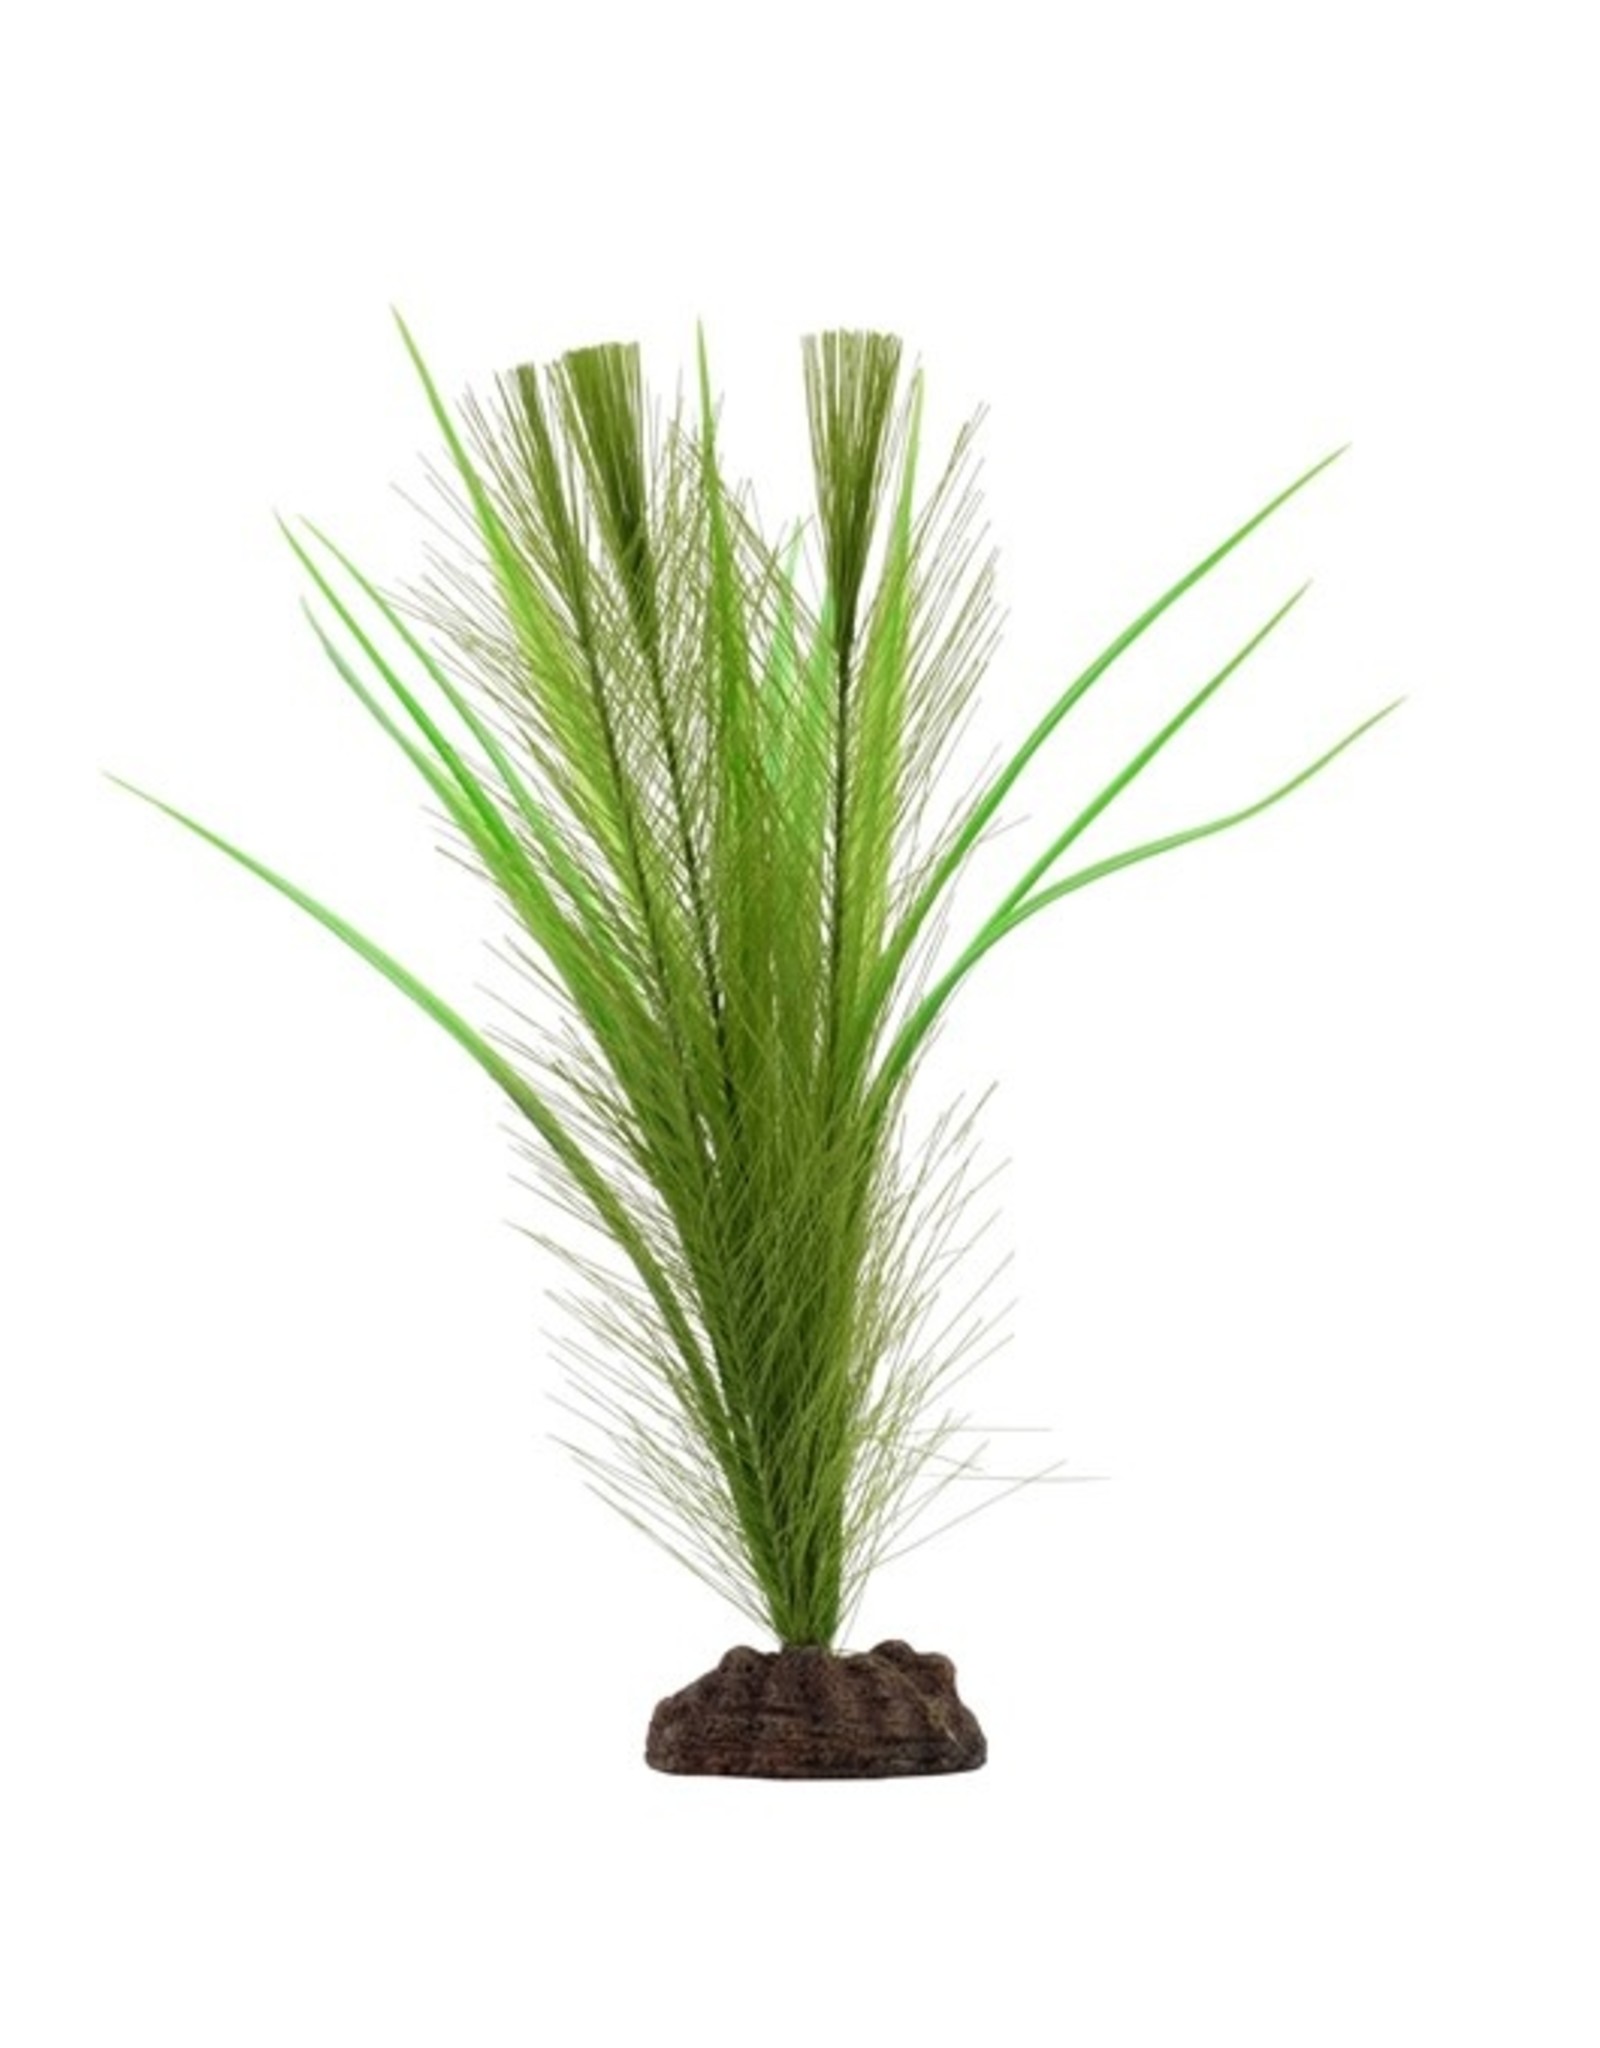 Fluval Fluval Green Parrot's Feather/Valisneria Plant, 12"